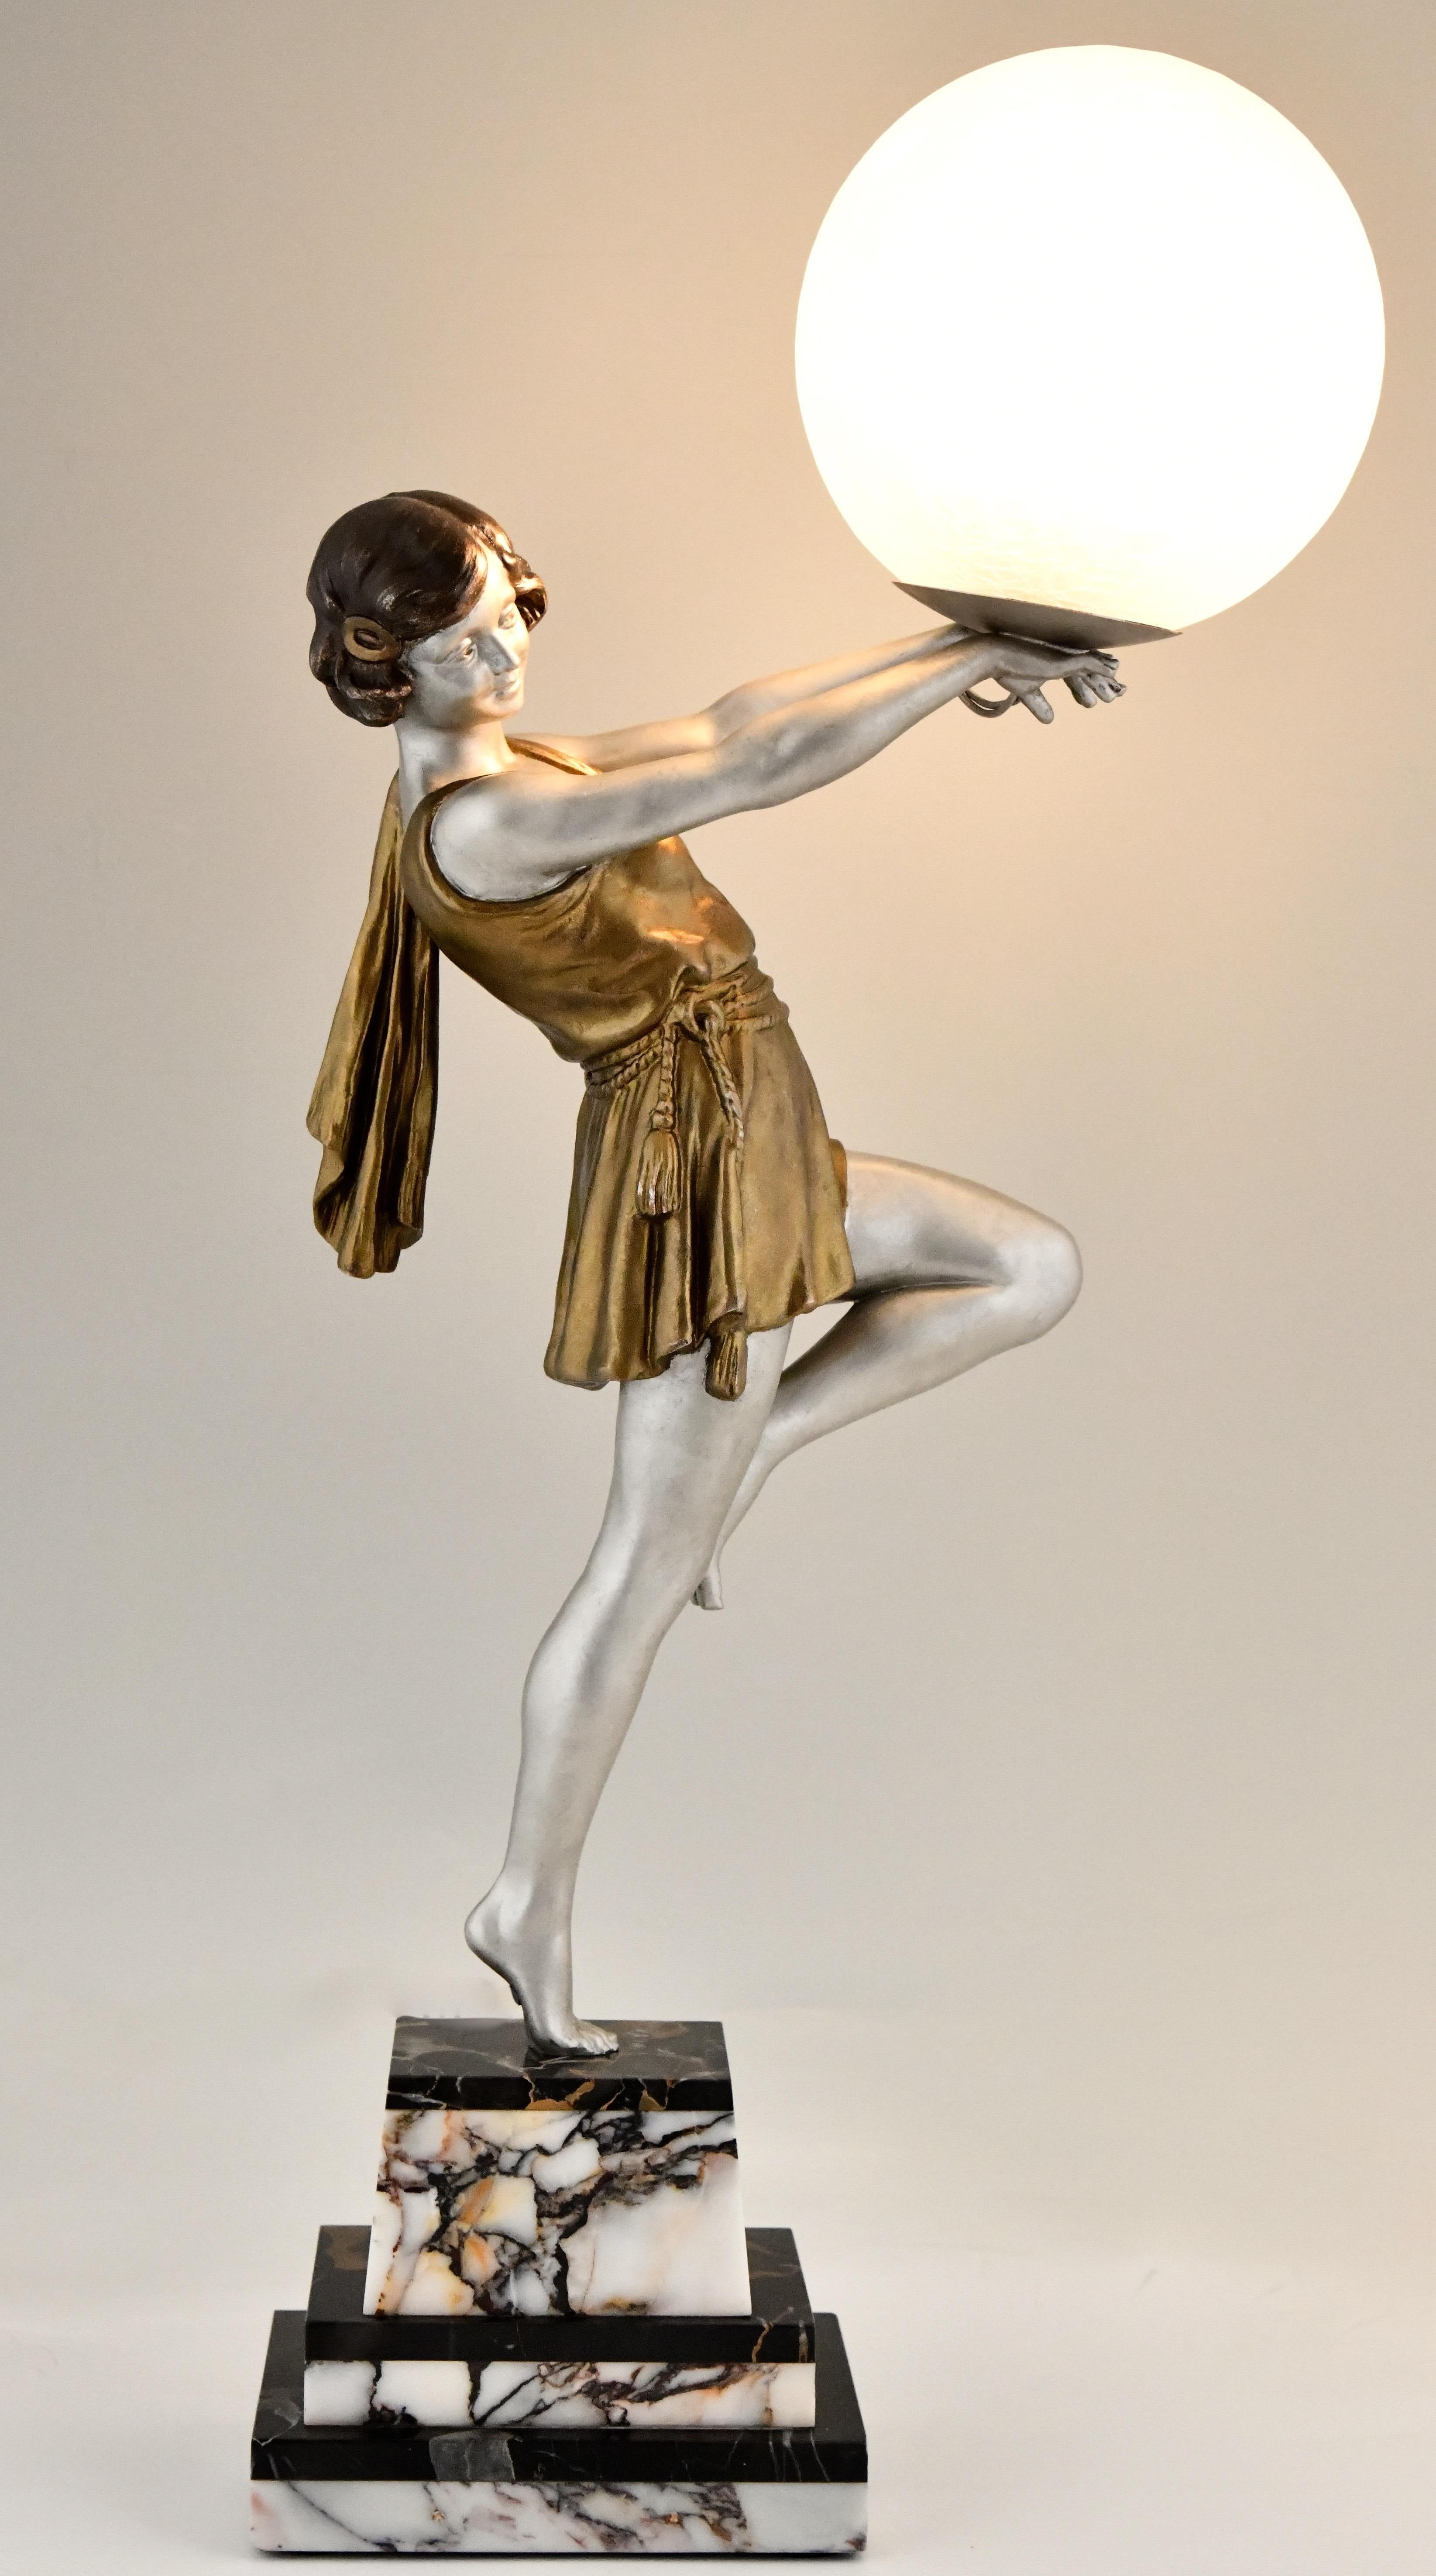 Art Deco lamp lady holding a ball by Emile Carlier
White metal with silver and golden patina on a black and white marble base.
Crackle glass shade.
France 1930.